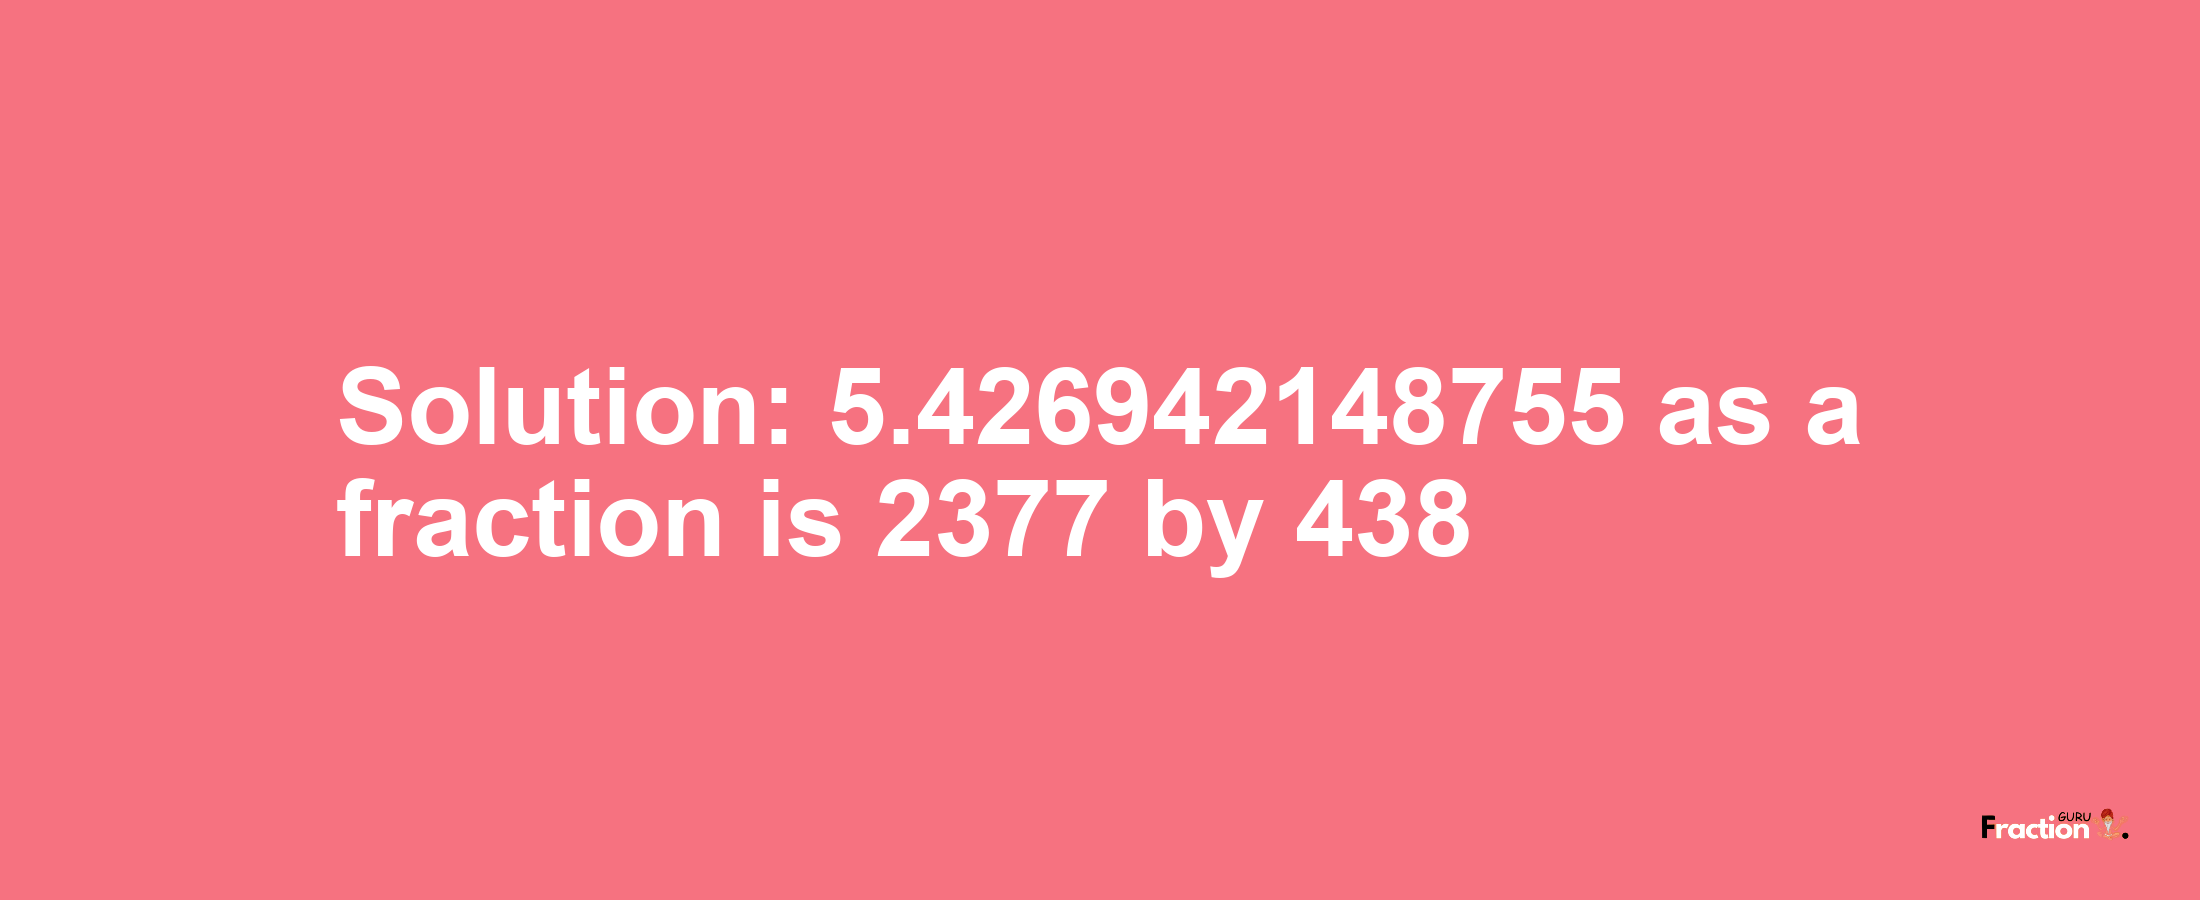 Solution:5.426942148755 as a fraction is 2377/438